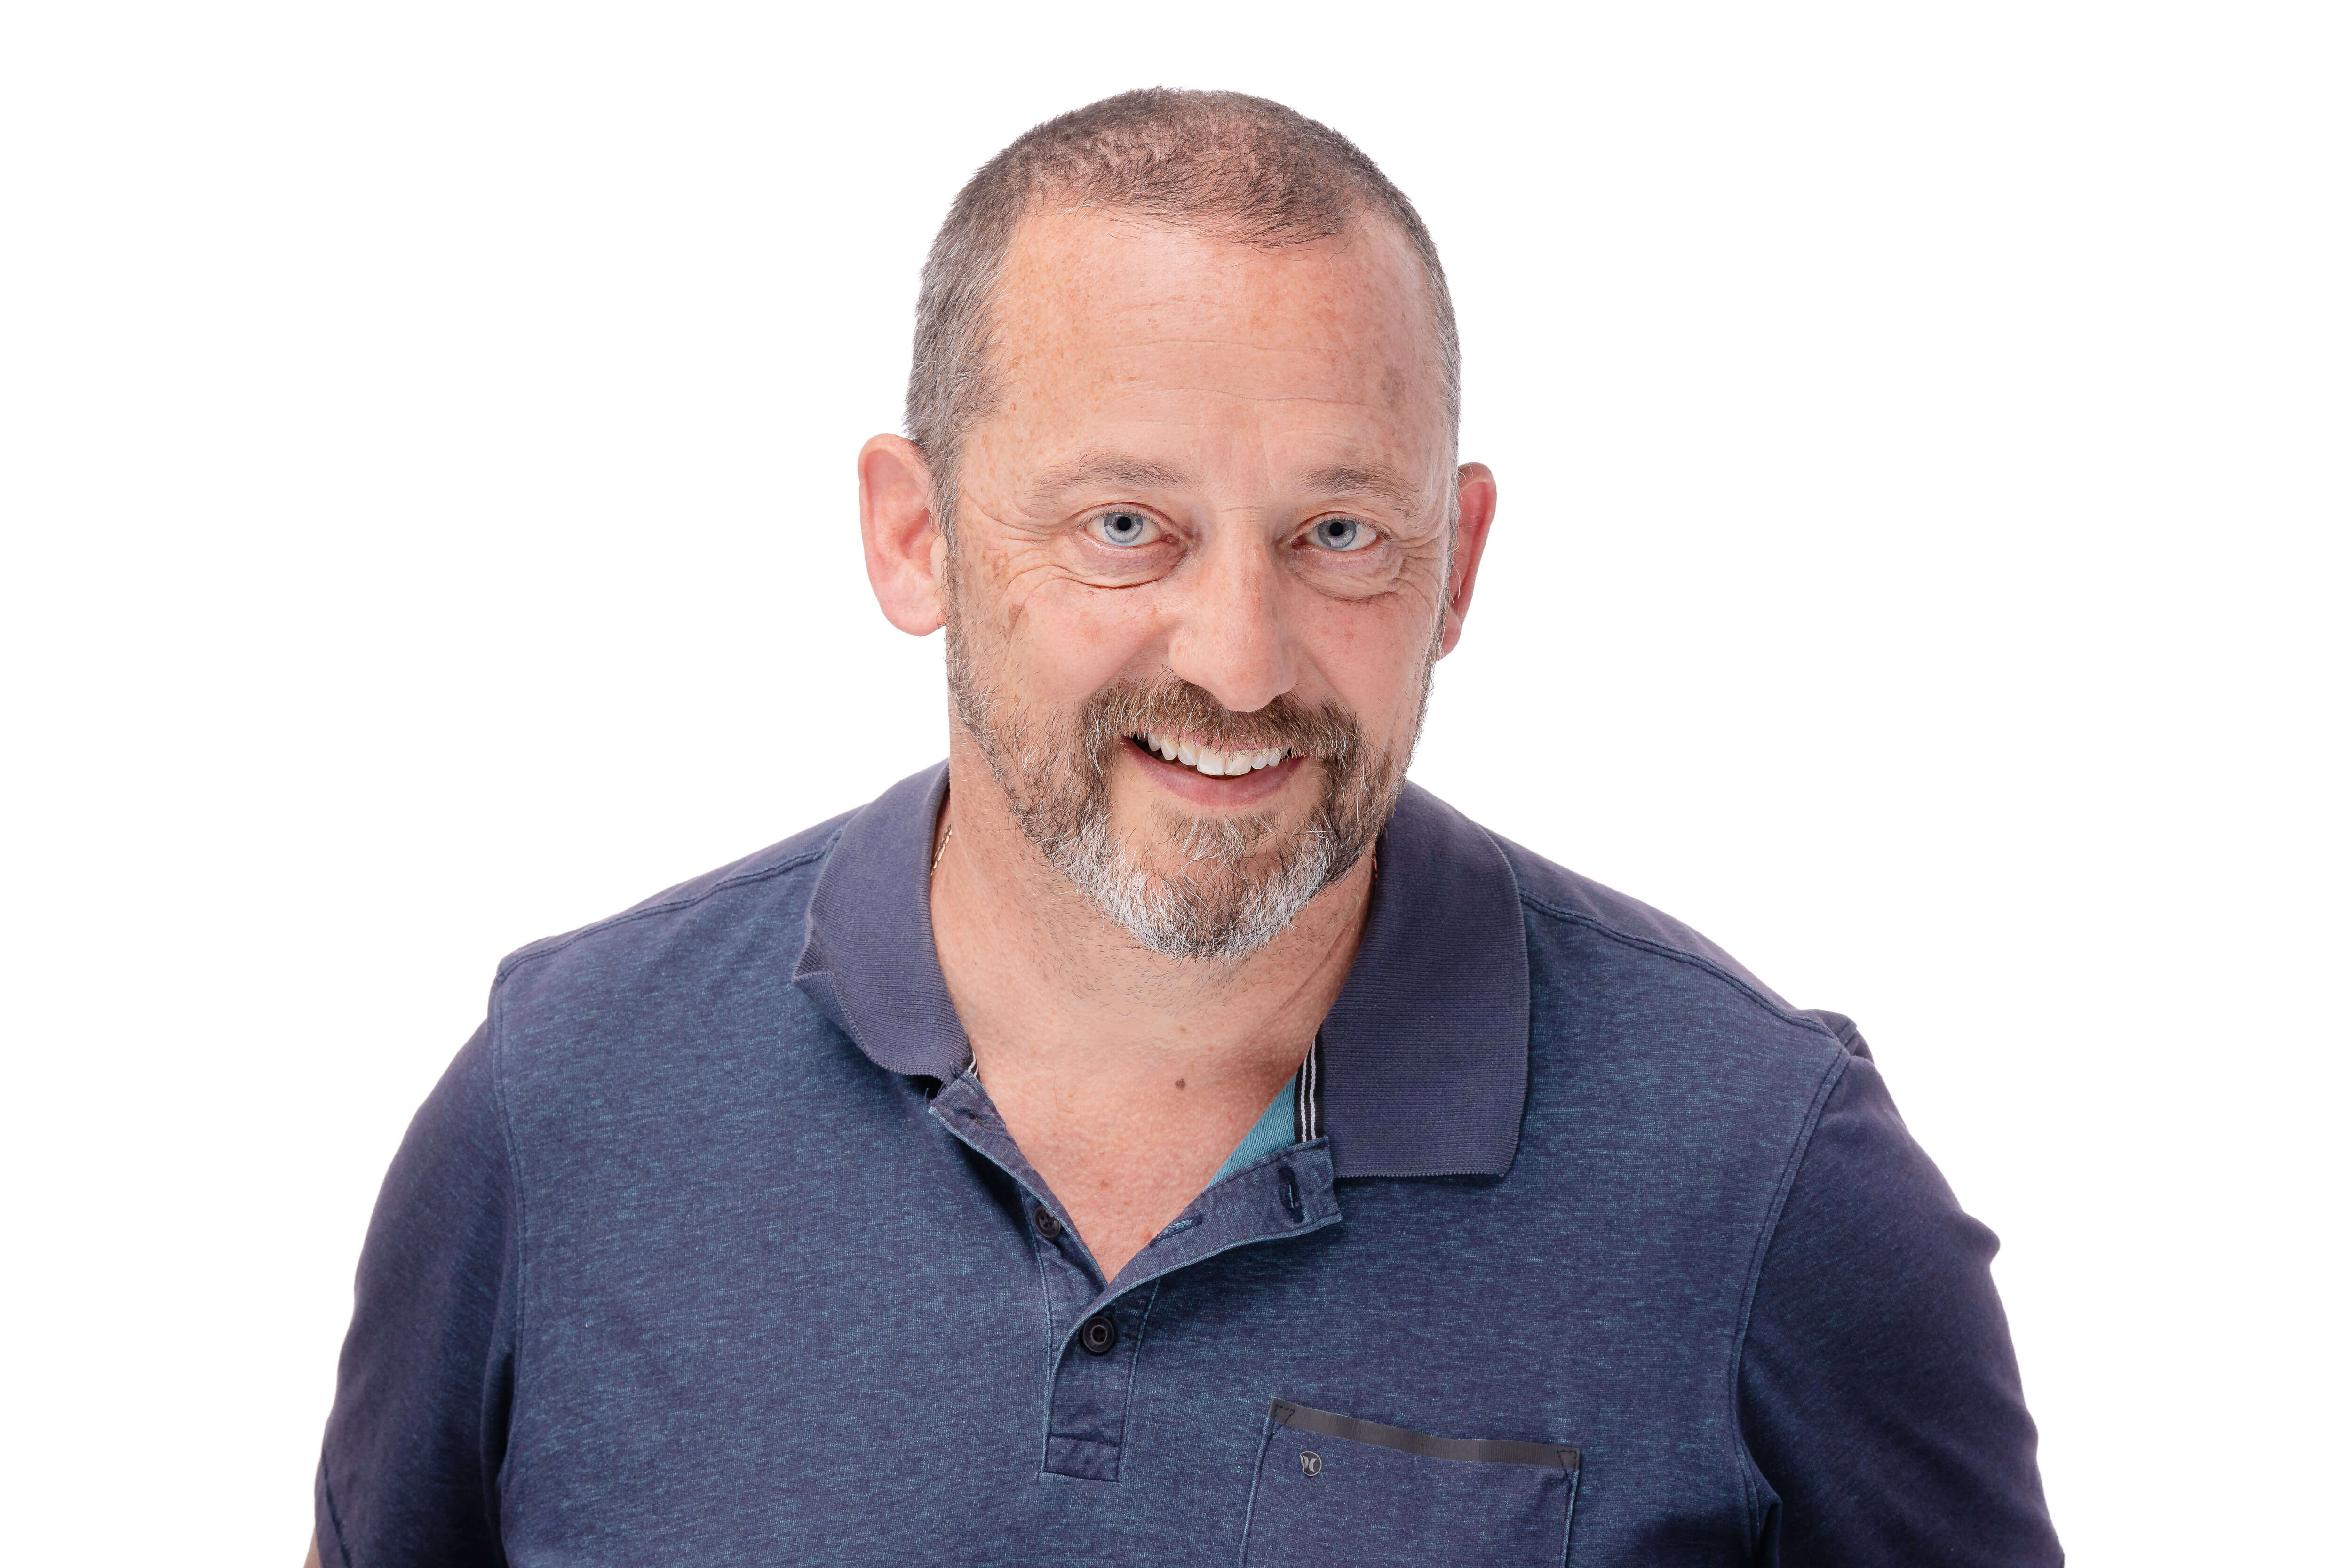 A headshot of a man with a closely cropped beard and a warm, engaging smile. He's wearing a casual navy polo shirt and the white background ensures his friendly expression is the focus of the image.